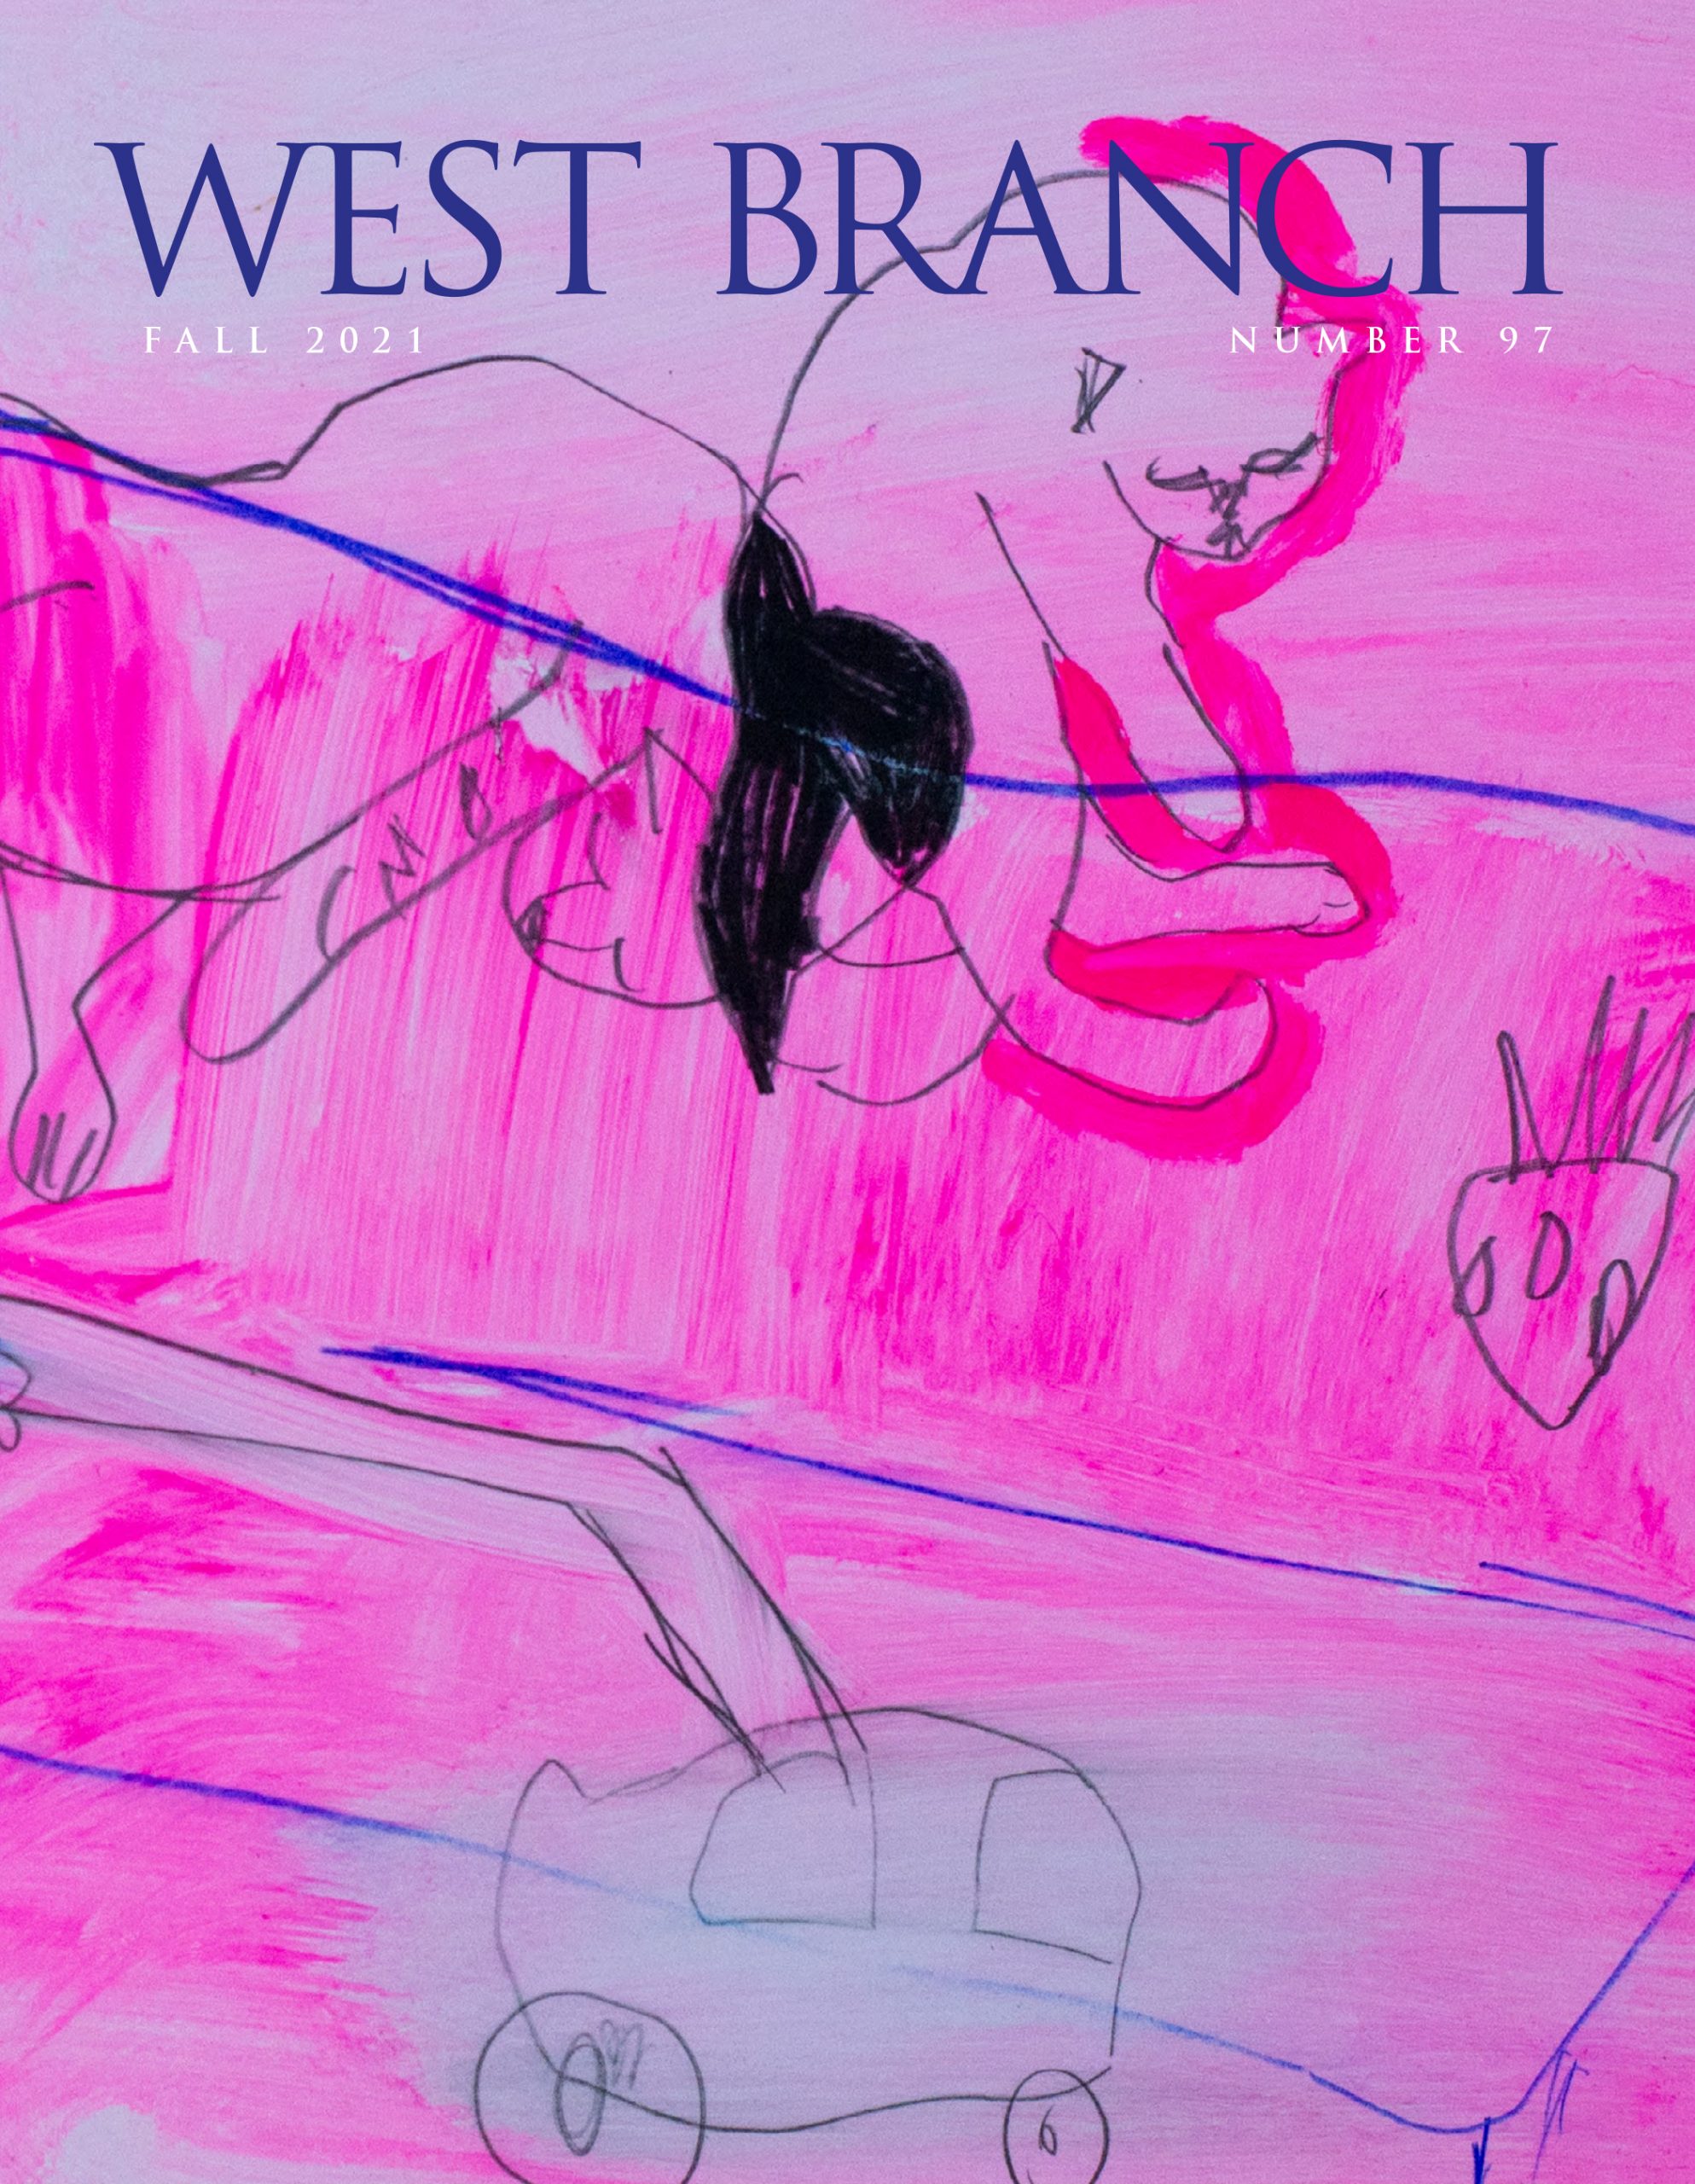 West Branch 97, Fall 2021